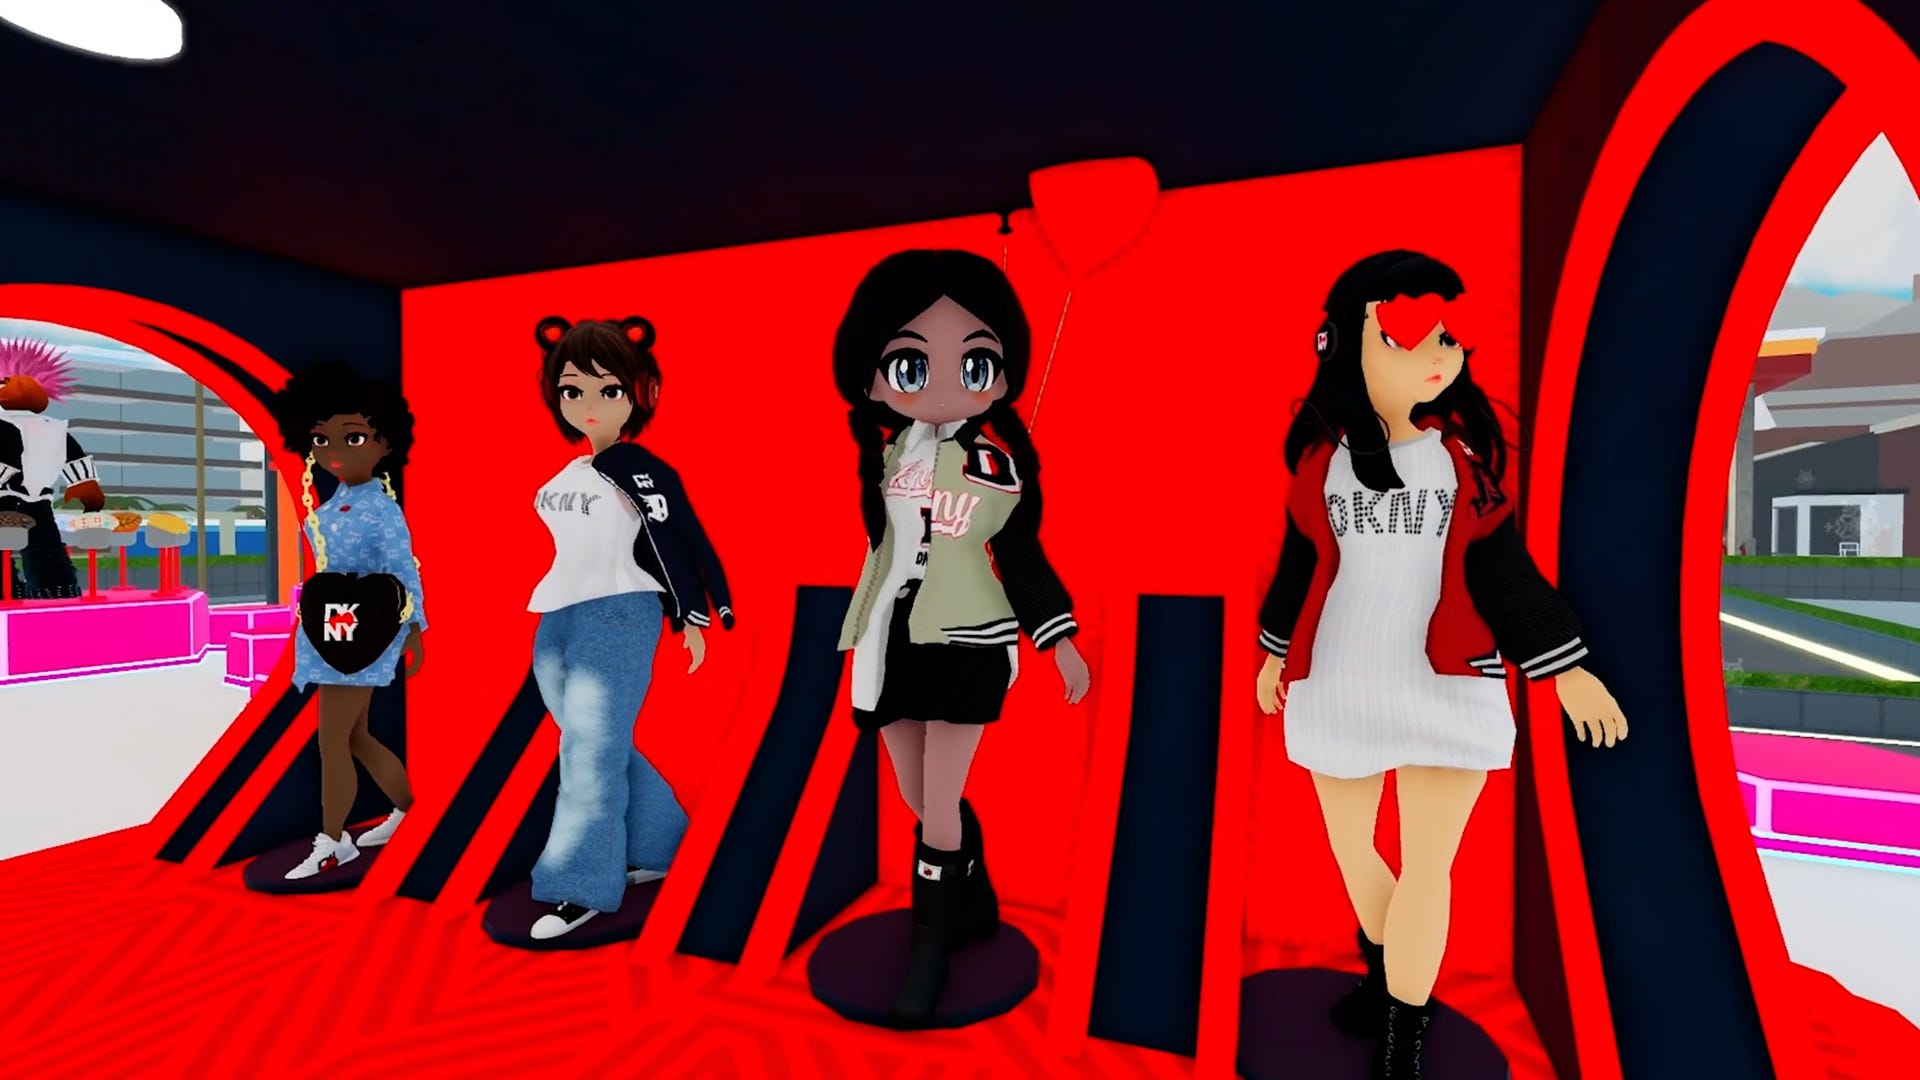 DKNY Launches Collection of Virtual Fashion Items on Roblox